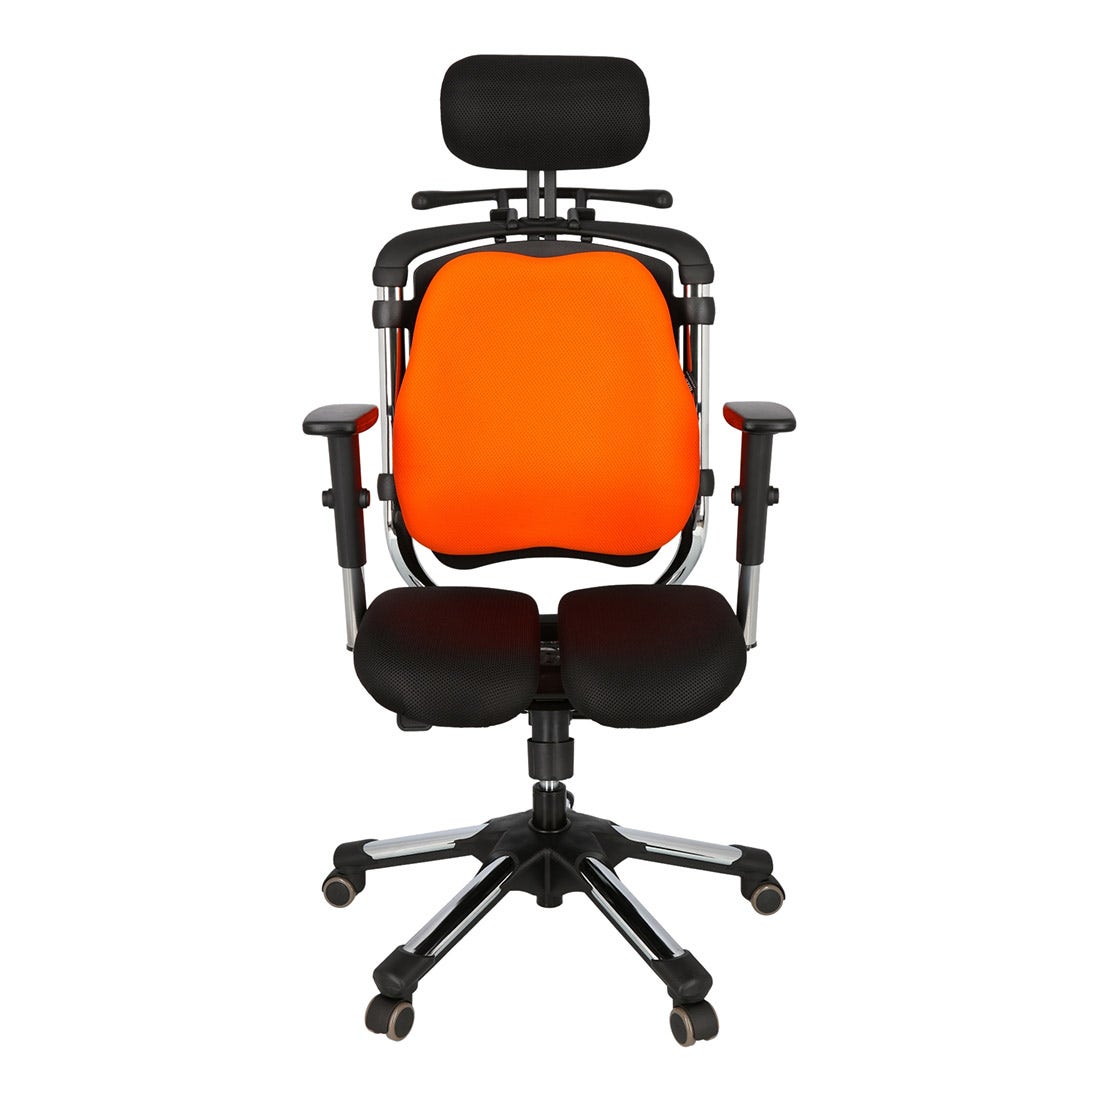 39014949-furniture-home-office-gaming-office-chair-01